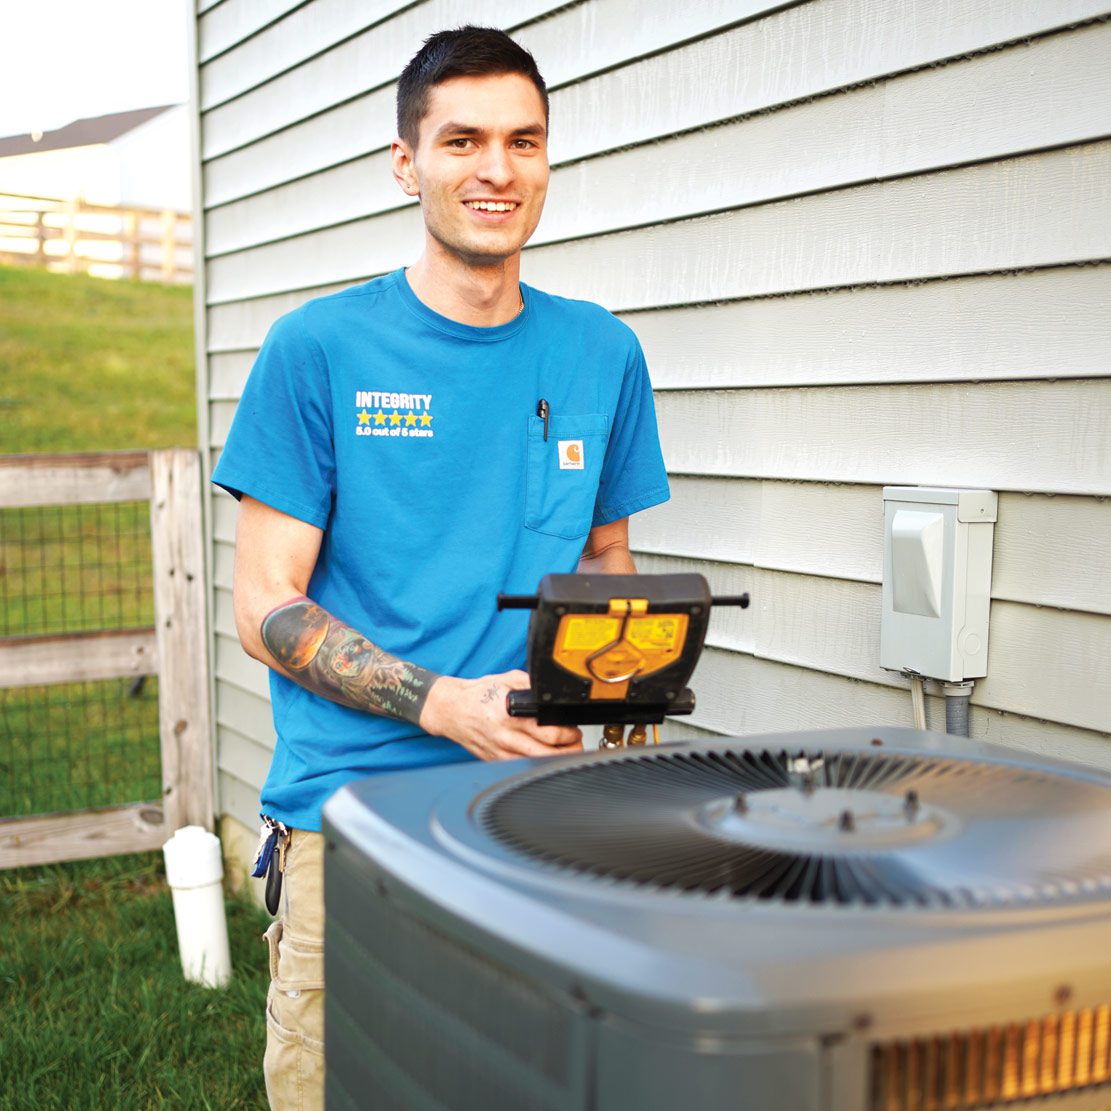 Heat Pump and Cooling Services in Fairborn, Ohio and Surrounding Areas